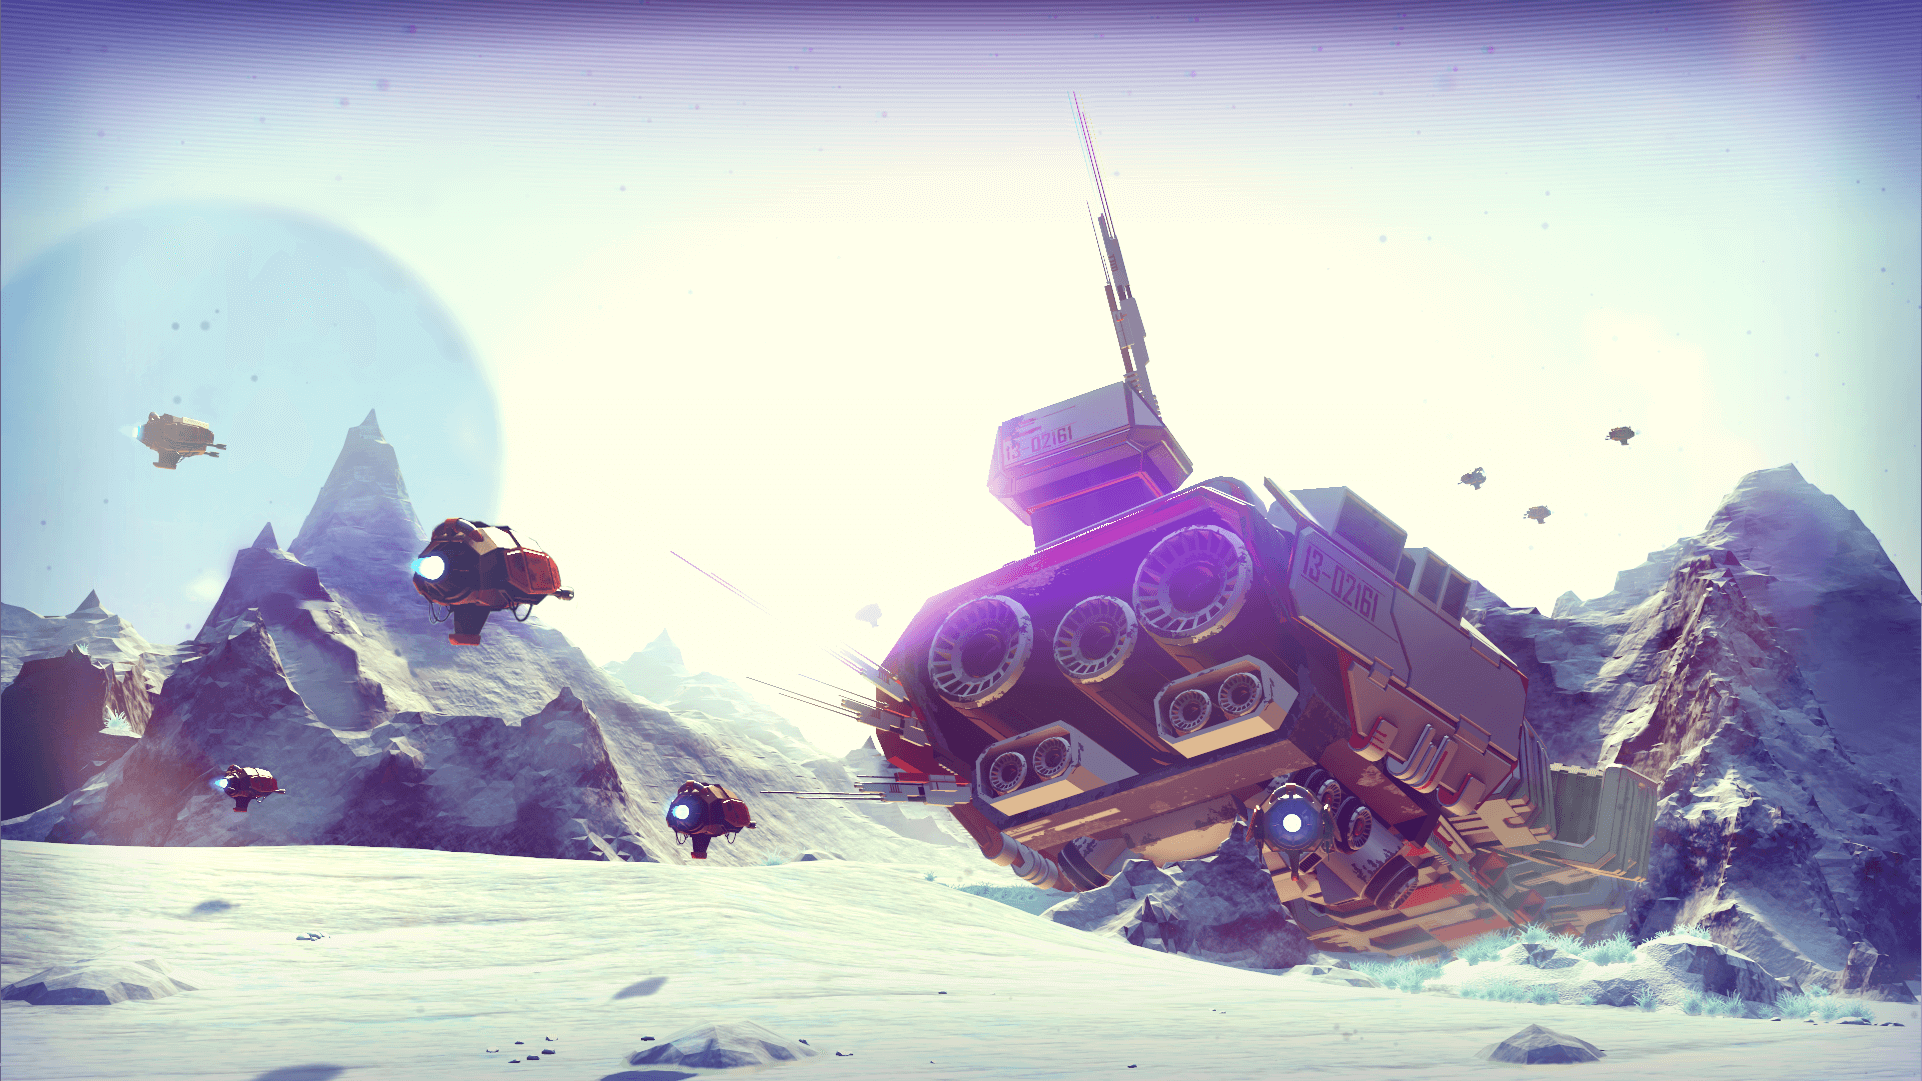 Image for No Man's Sky creator says next game is "pretty ambitious"